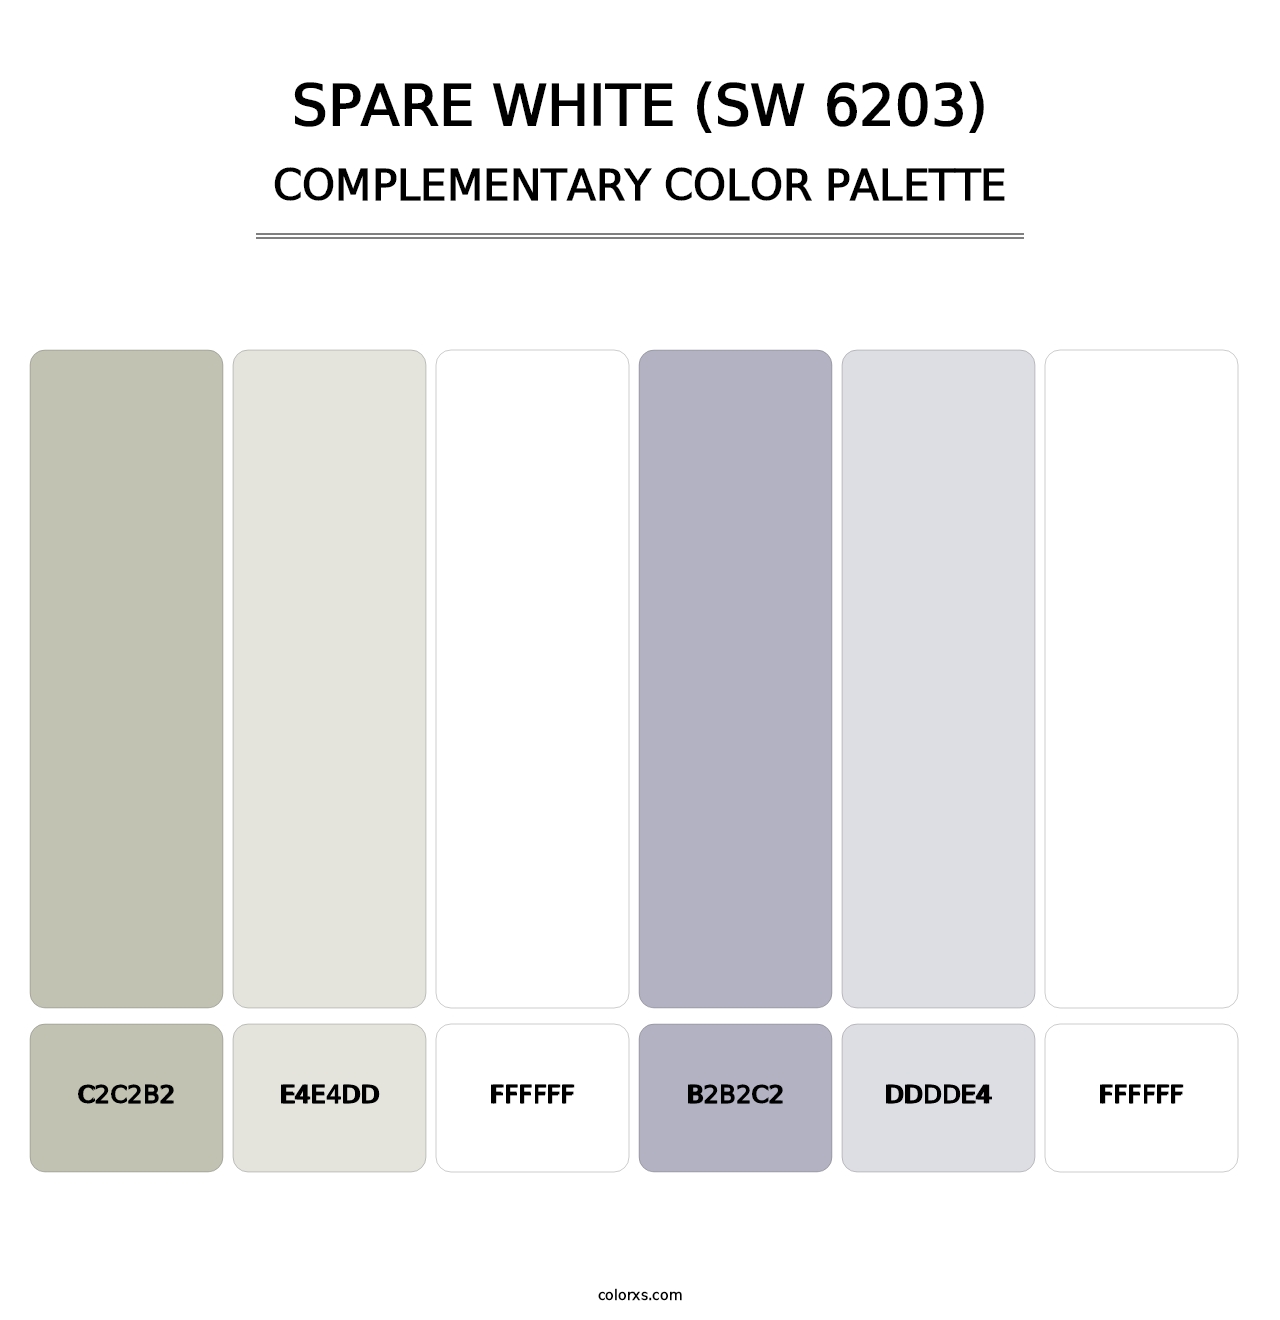 Spare White (SW 6203) - Complementary Color Palette